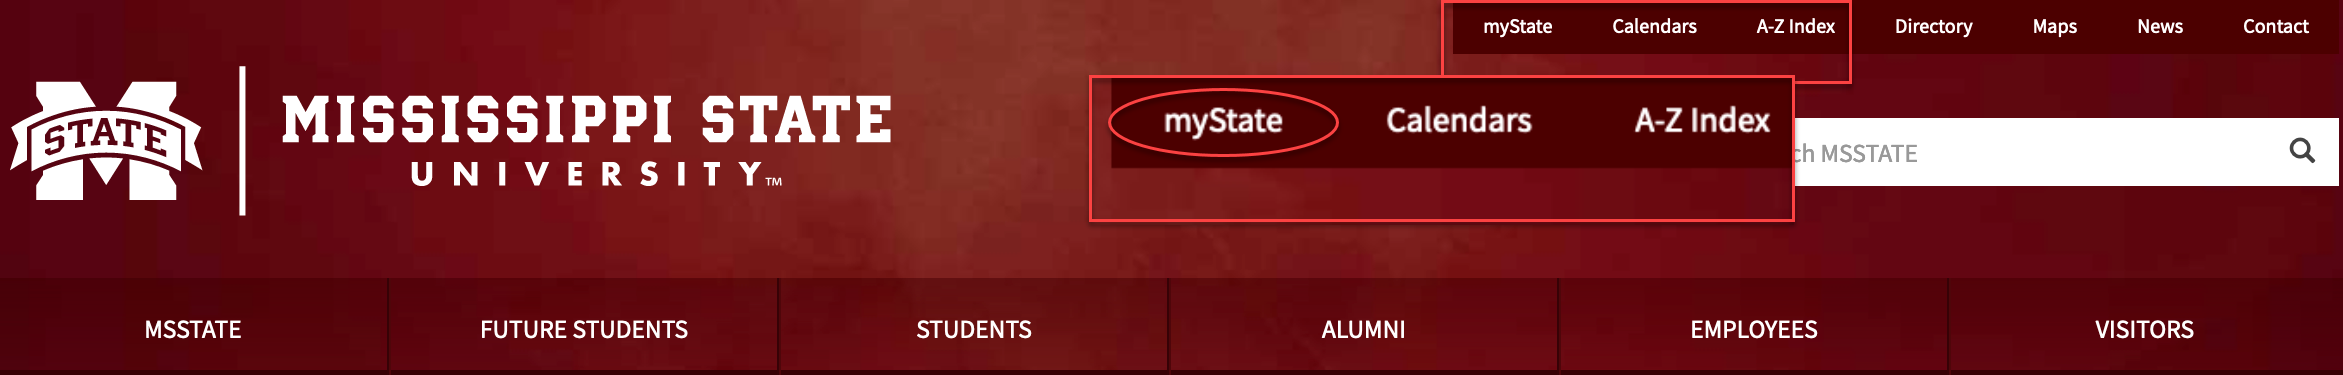 Screenshot for step 1 showing the myState link on the msstate.edu page